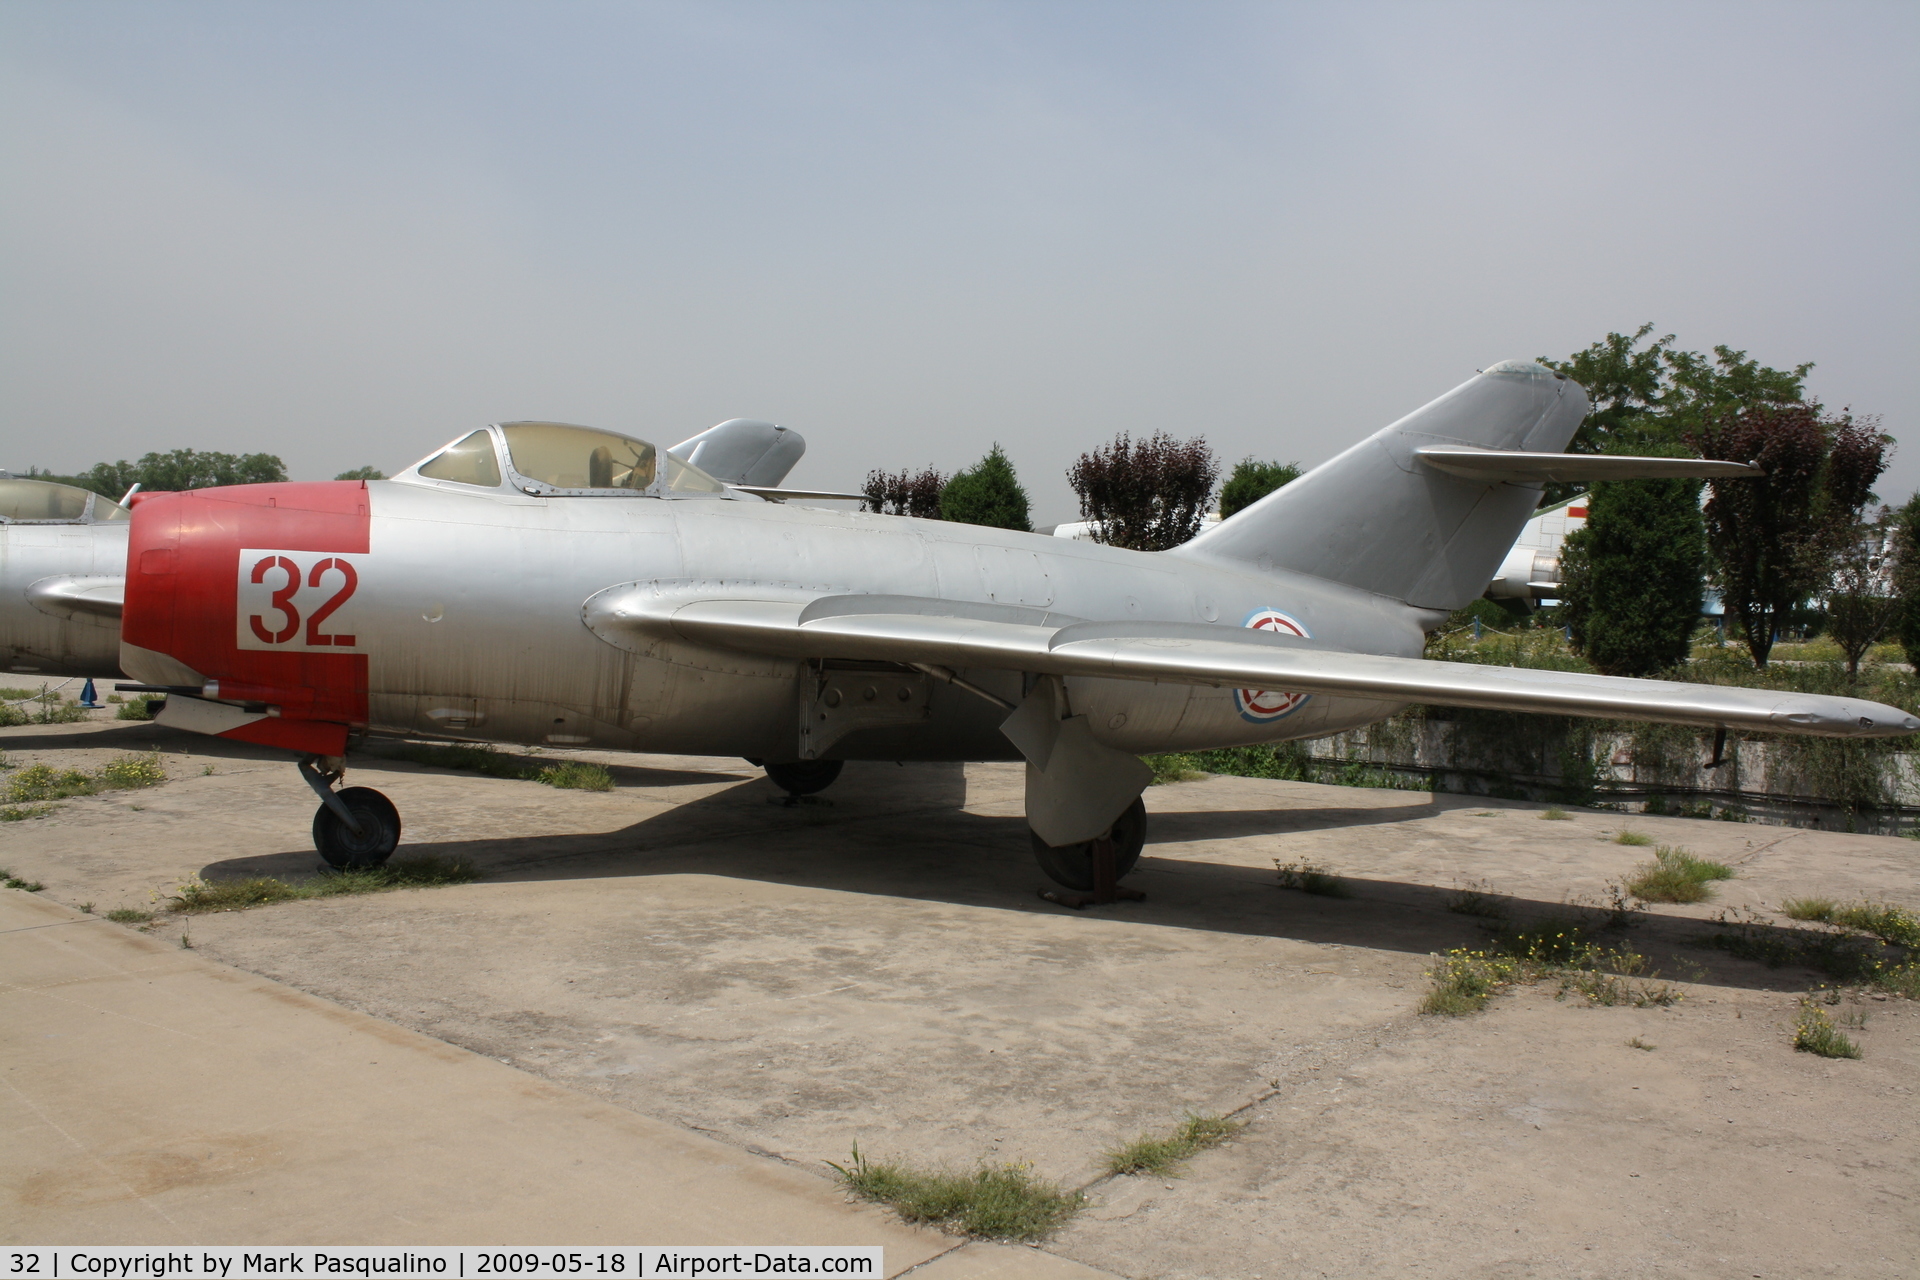 32, Mikoyan-Gurevich MiG-15bis C/N Not found 32, MiG-15  Located at Datangshan, China